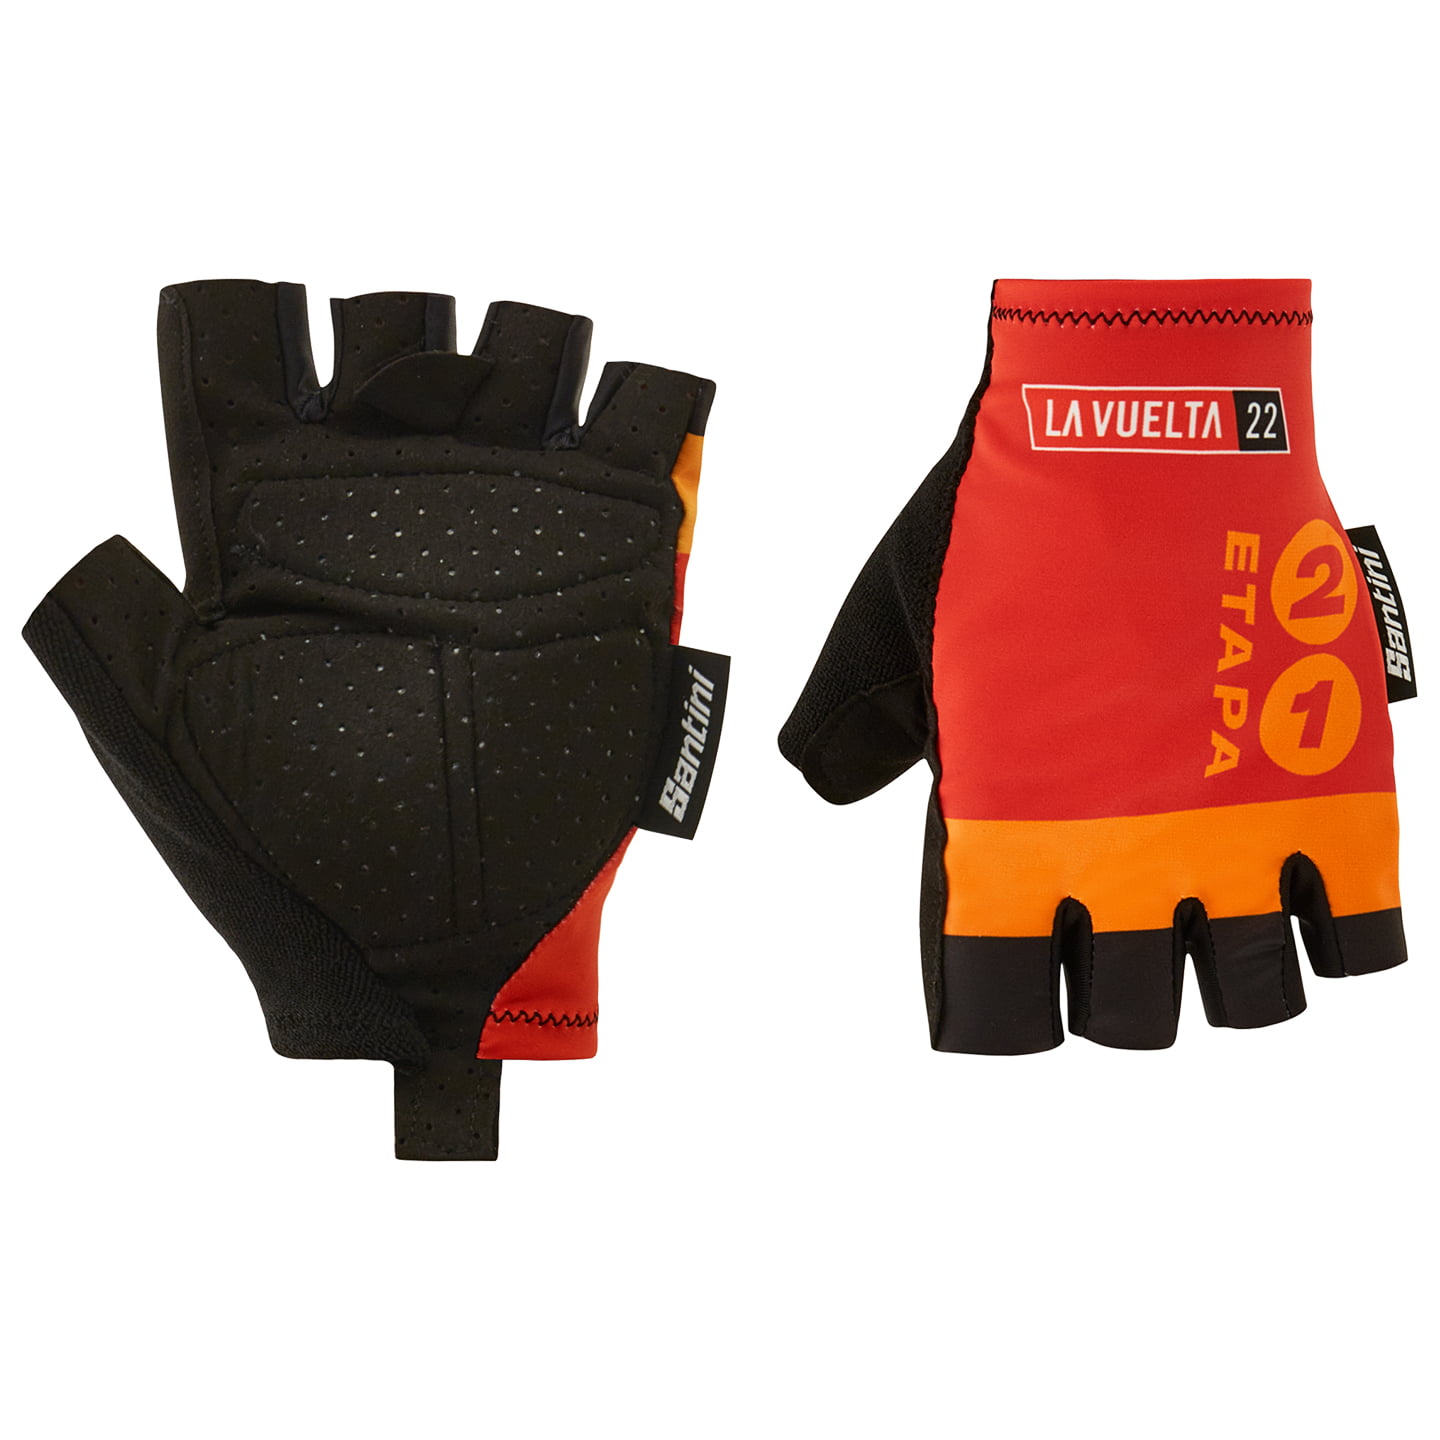 LA VUELTA Madrid 2022 Cycling Gloves, for men, size M, Cycling gloves, Cycling gear